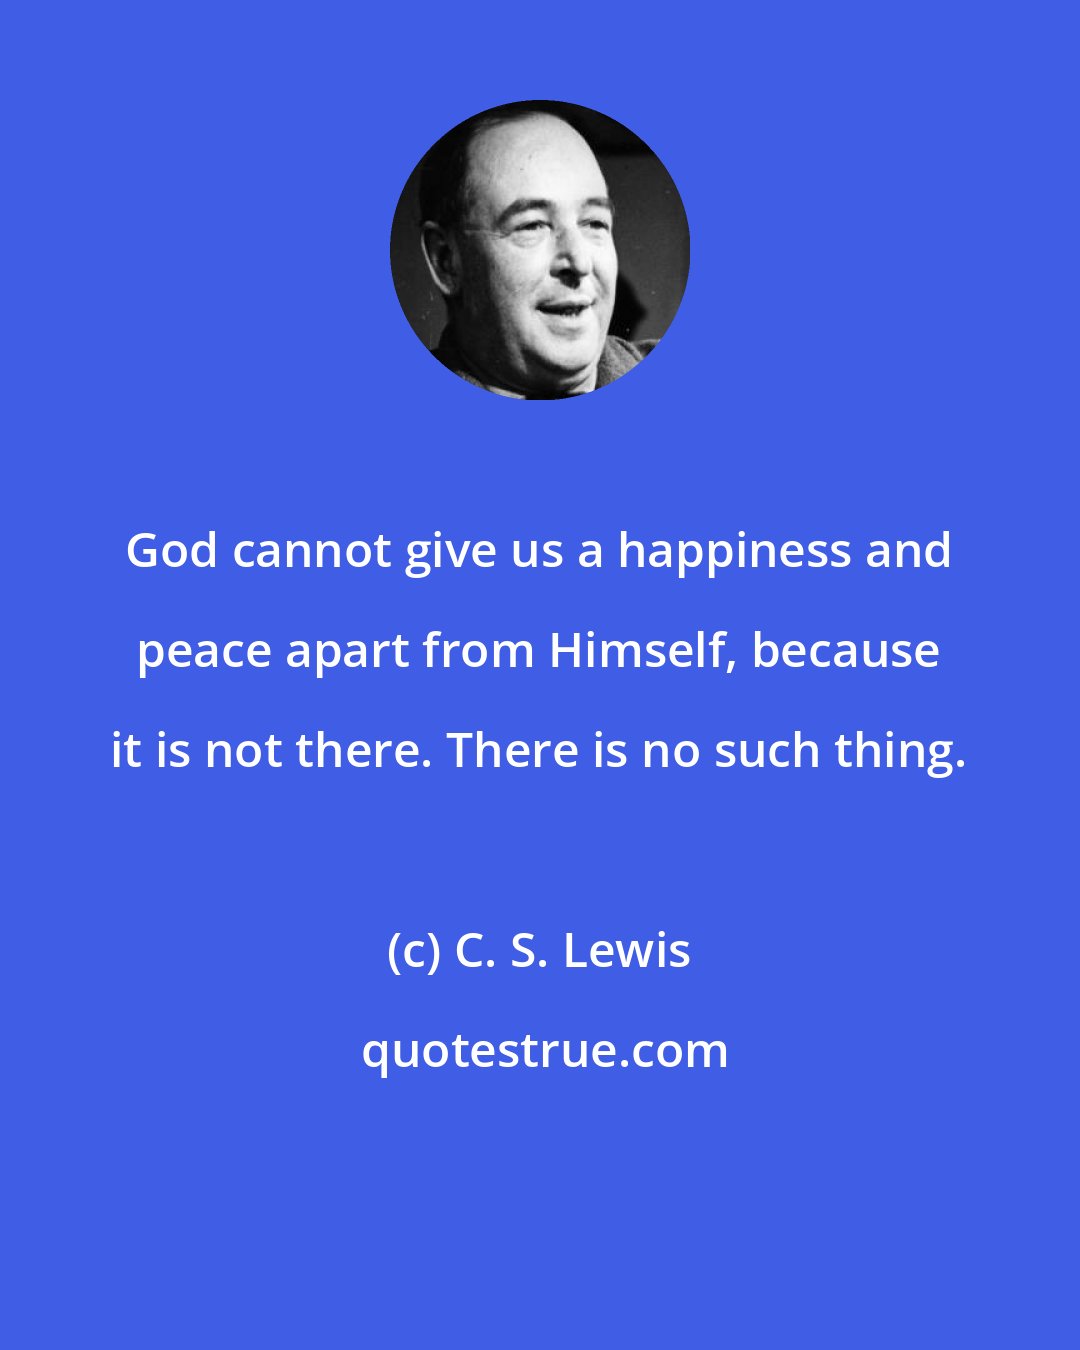 C. S. Lewis: God cannot give us a happiness and peace apart from Himself, because it is not there. There is no such thing.